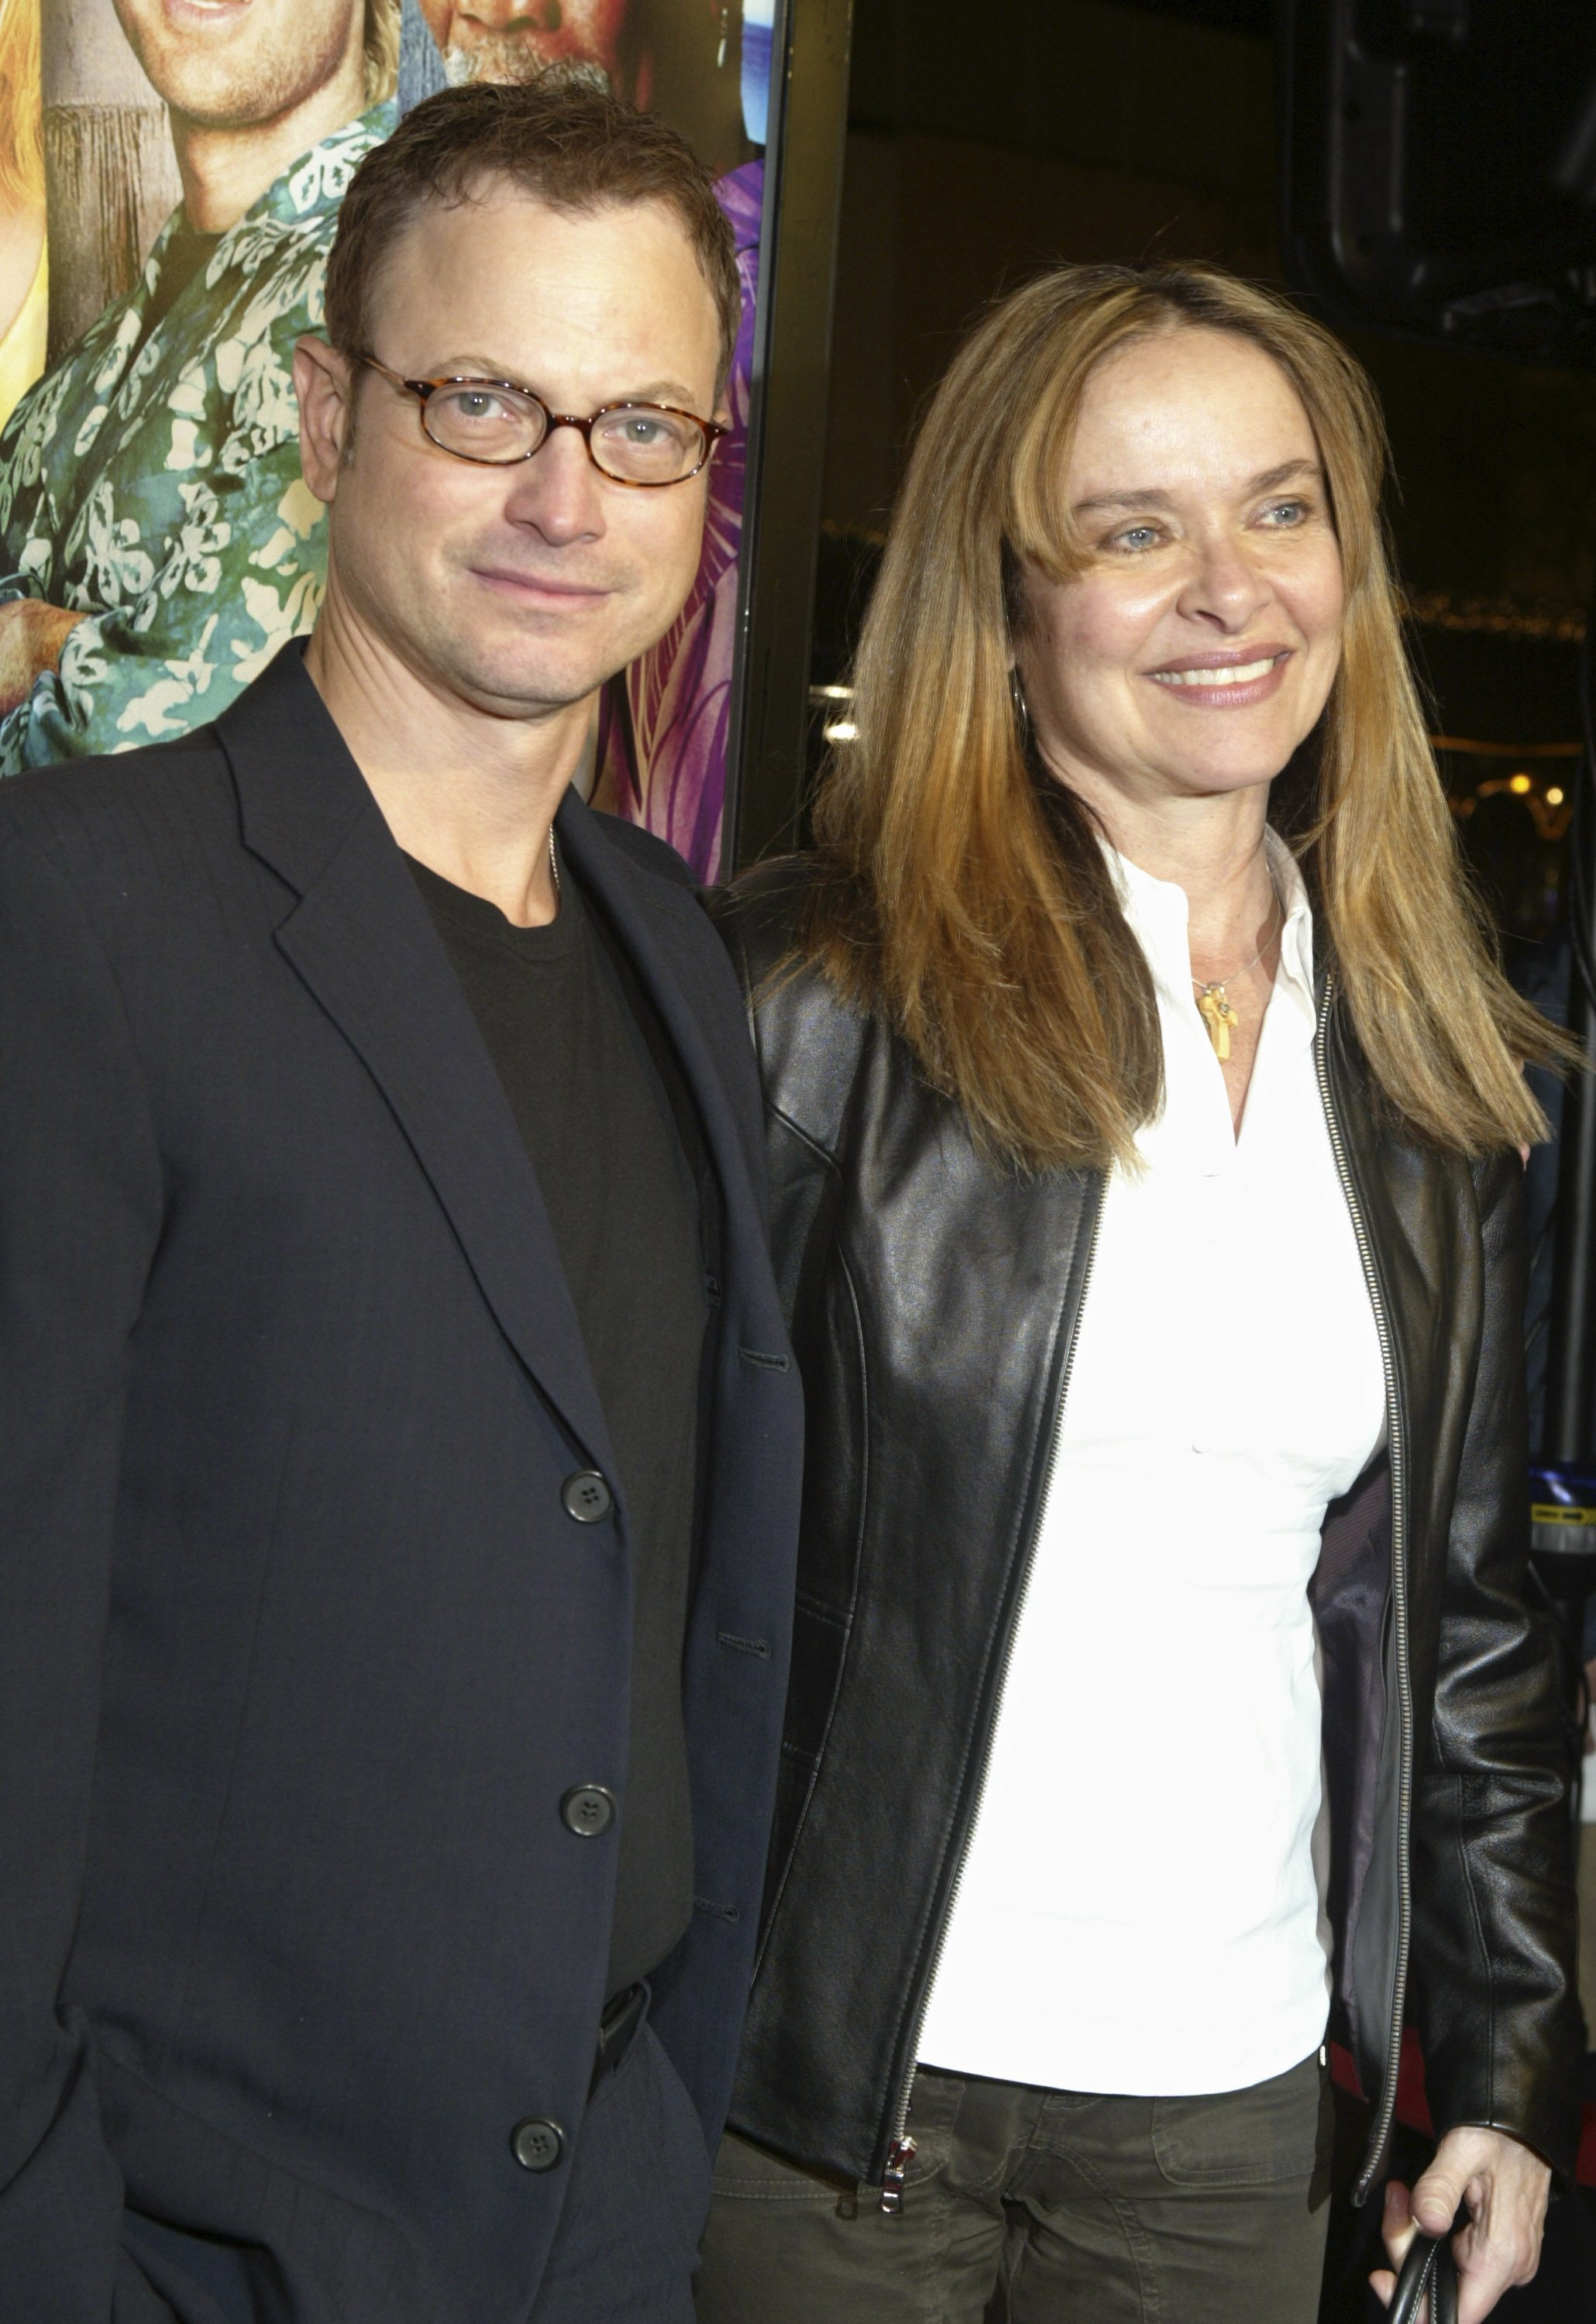 Gary Sinise and Moira Harris during "The Big Bounce" premiere at Mann Village Westwood in Westwood, California, on January 29, 2004. | Source: Getty Images